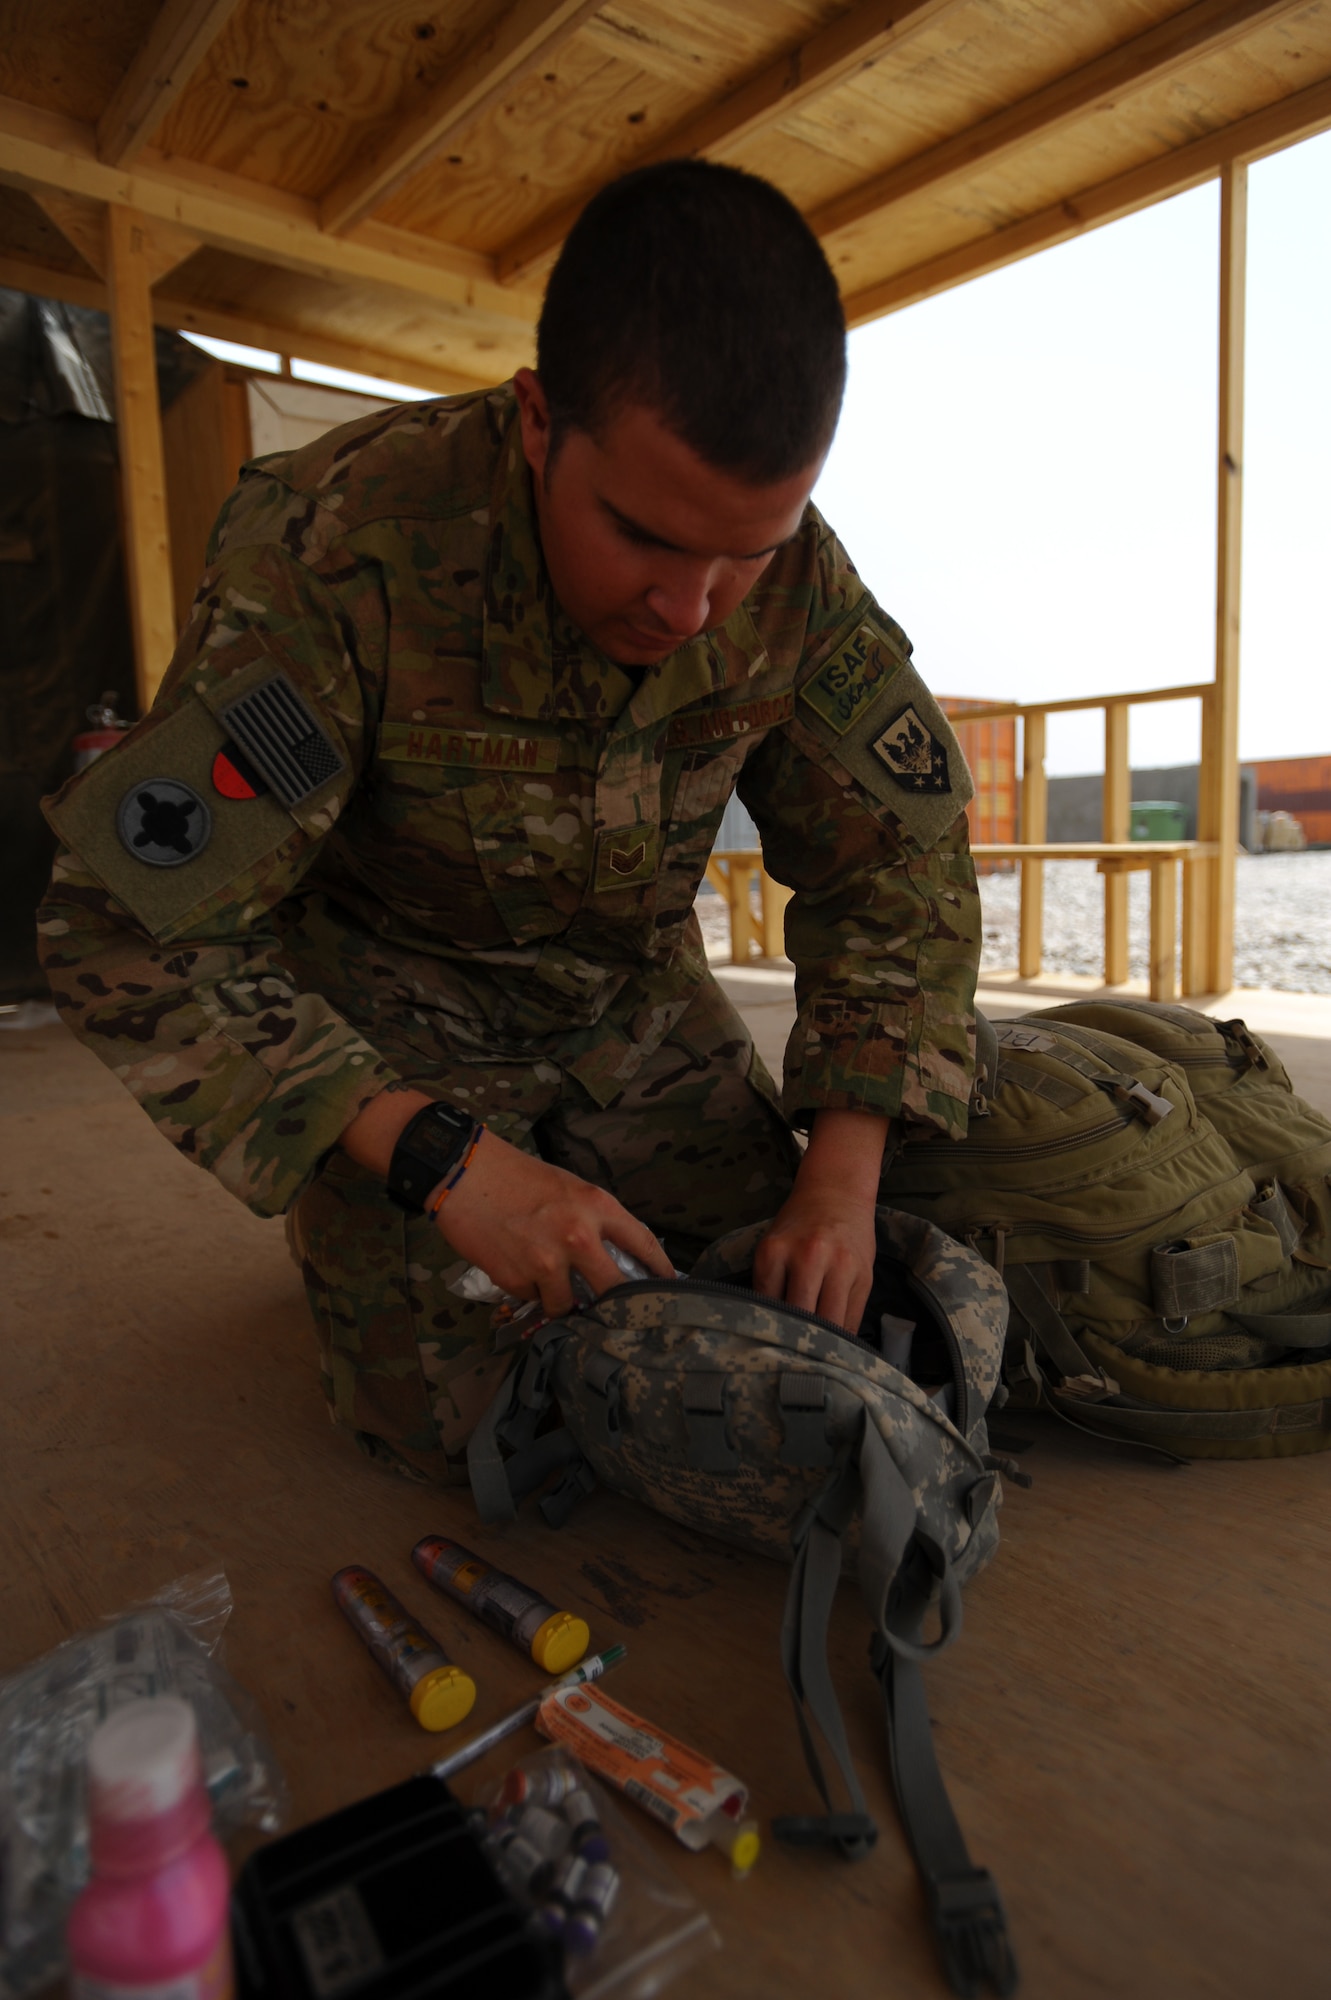 Air Force Staff Sgt. Ryan Hartman, 298th Combat Sustainment Support Battalion medical services technician, conducts an inventory of his medical packs at Shindand Air Base, Afghanistan, Aug. 6, 2011, to ensure sufficient supplies are always ready when he needs them. Hartman is a joint expeditionary tasking, or JET, Airman deployed to Afghanistan and is attached to the Army's 298th CSSB in support of Operation Enduring Freedom. The JET mission is a high visibility program that makes up just five percent of all Air Force deployments and provides combat mission ready Airmen to Army combatant commanders. (U.S. Air Force photo/ Master Sgt. William Greer)